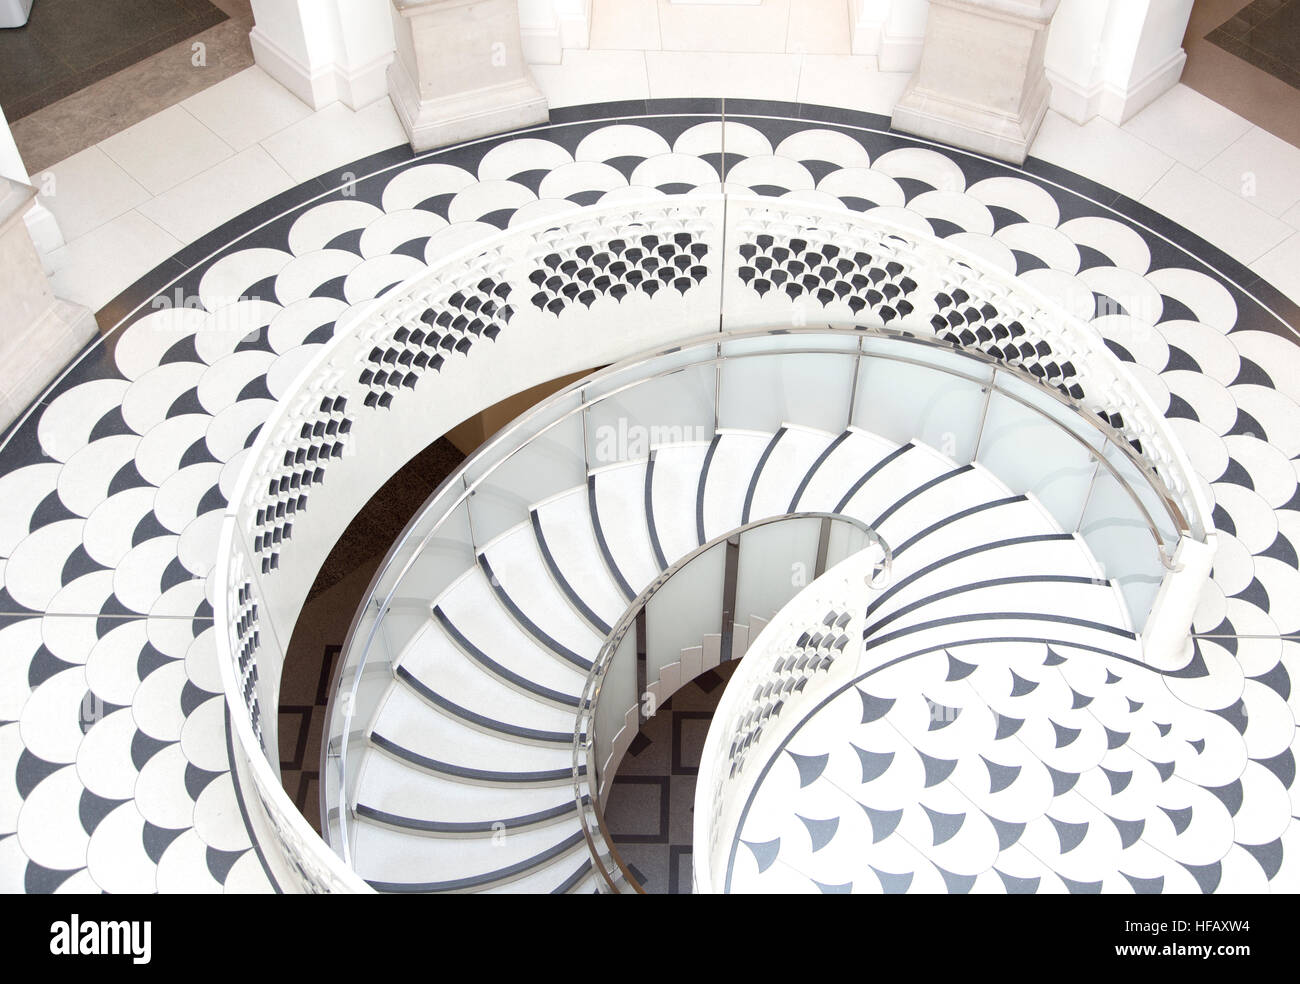 LONDON - April 12 : Tate Britain Spiral Staircase in London on April 12, 2015 for Editoral Use only Stock Photo